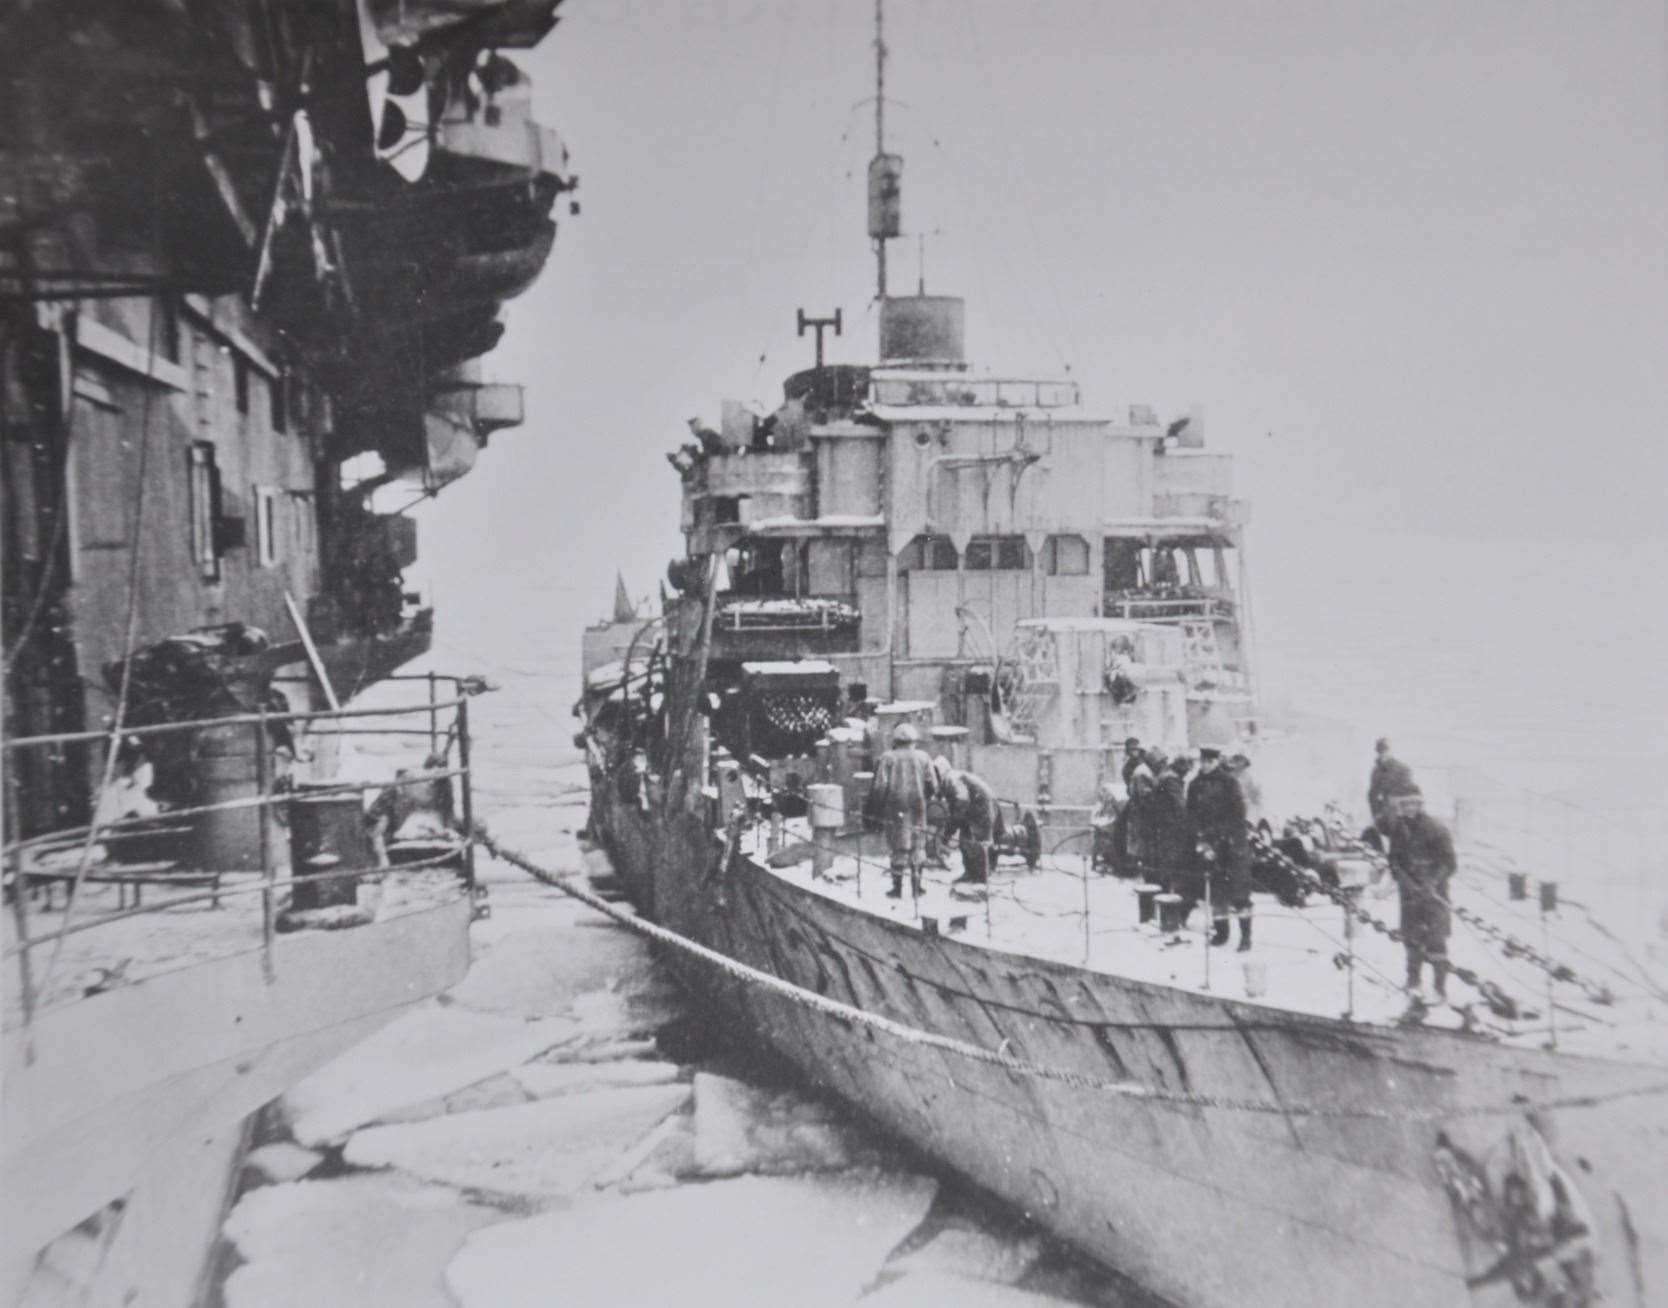 One of the ships of the Russian Arctic convoys, described by Winston Churchill as the 'worst journey in the world'.